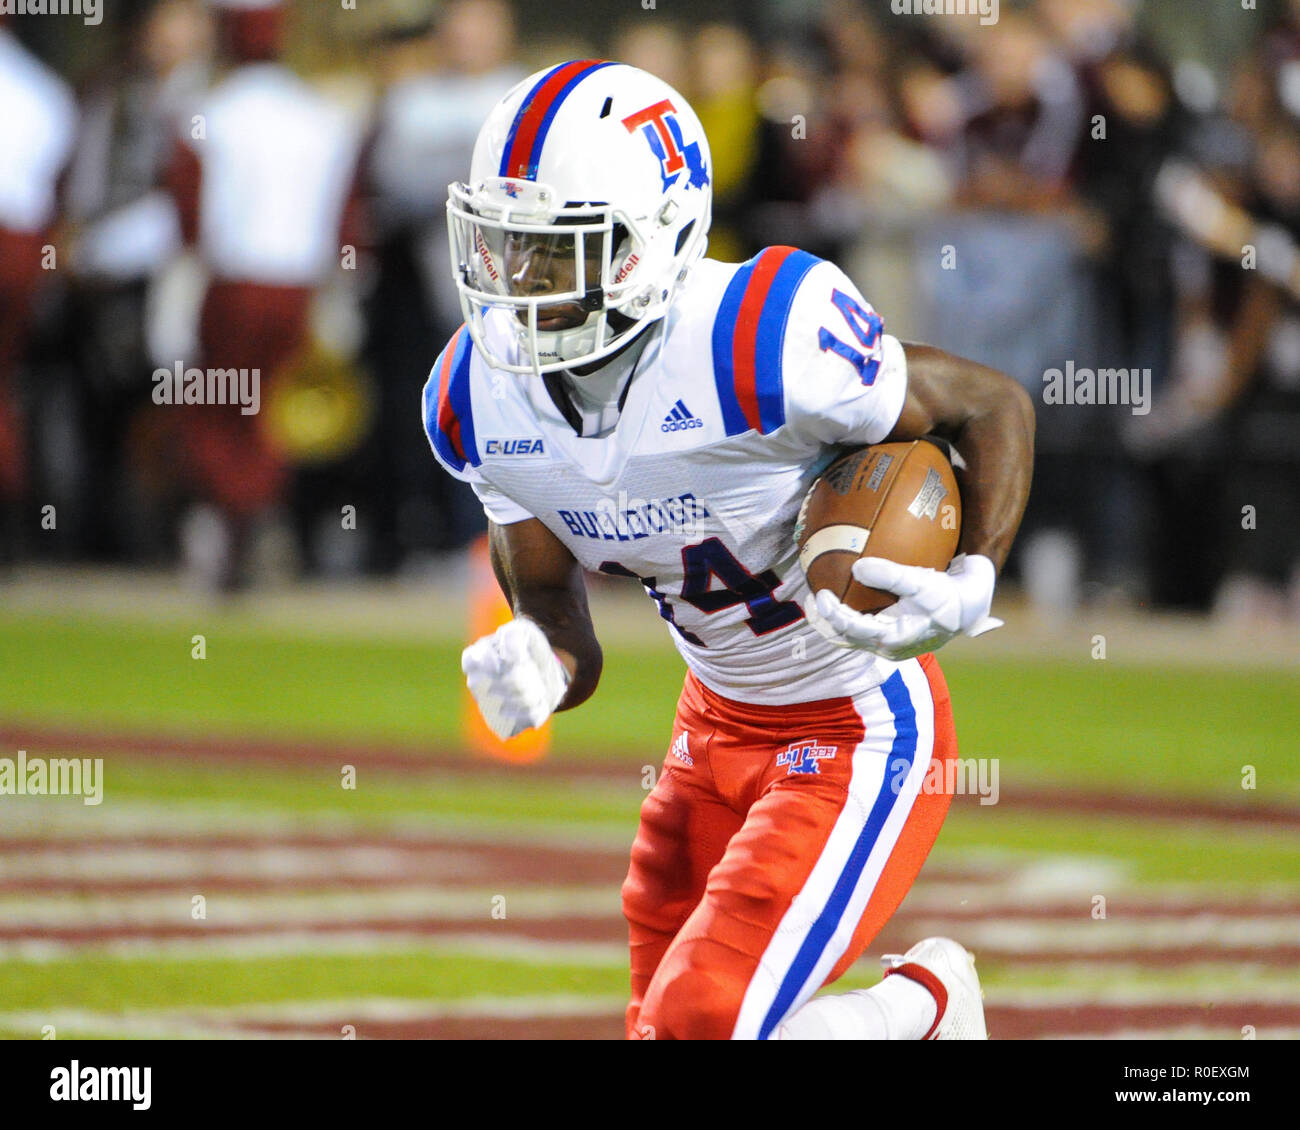 November 03, 2018: Louisiana Tech wide receiver, PRAISE OKORIE (14), runs the ball, during the NCAA Division I football game between Louisiana Tech and the Mississippi State Bulldogs at Davis Wade Stadium in Starkville, MS. Mississippi State leads LA Tech at the half, 31-3. Kevin Langley/CSM Stock Photo